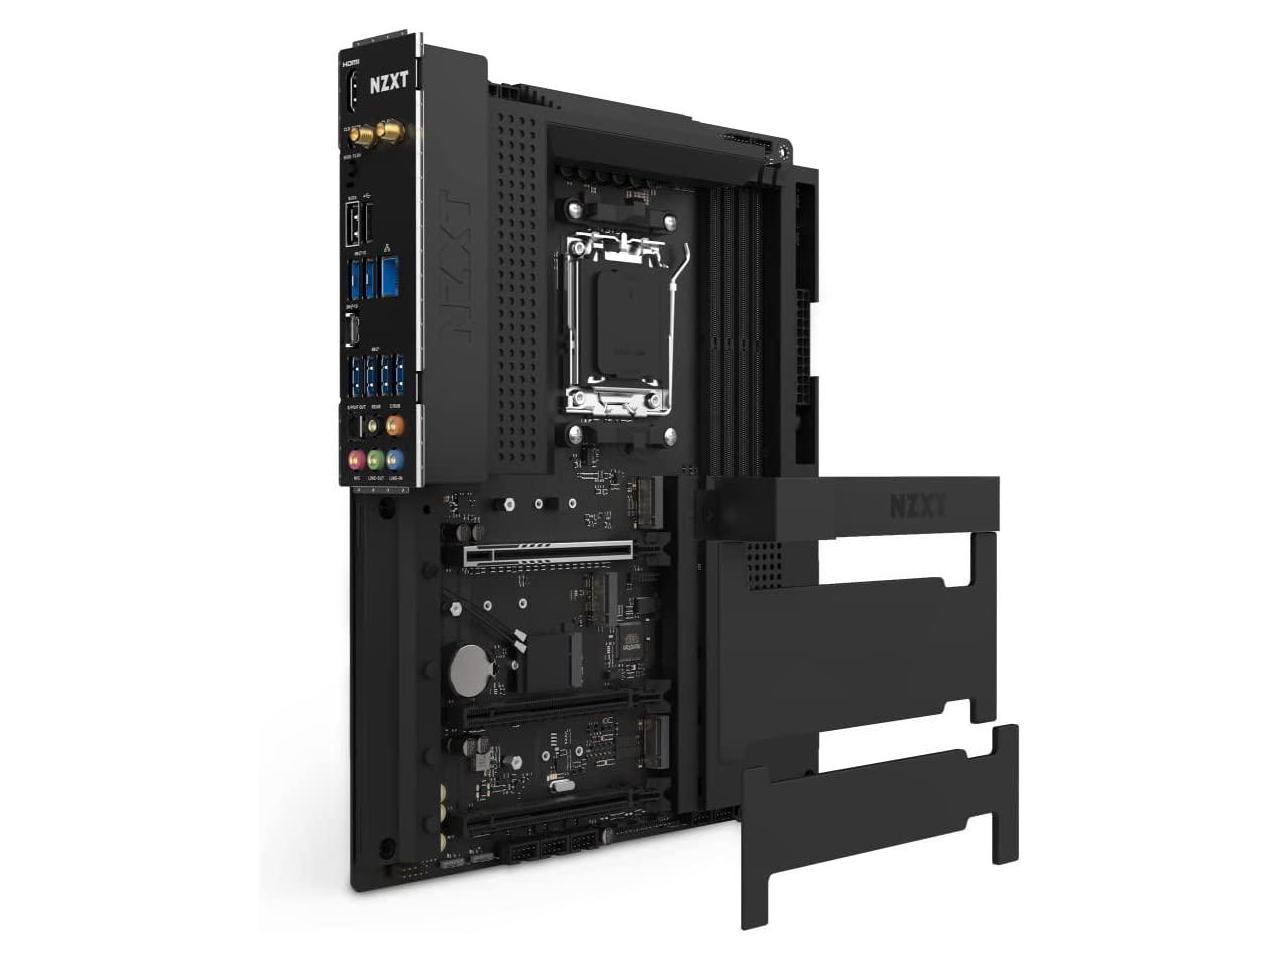 NZXT N7 B650 - N7-B65XT-B1 - AMD B650 chipset (Supports AMD 7000 Series CPUs) - ATX Gaming Motherboard - Integrated Rear I/O Shield - WiFi 6 connectivity - Black - image 3 of 16